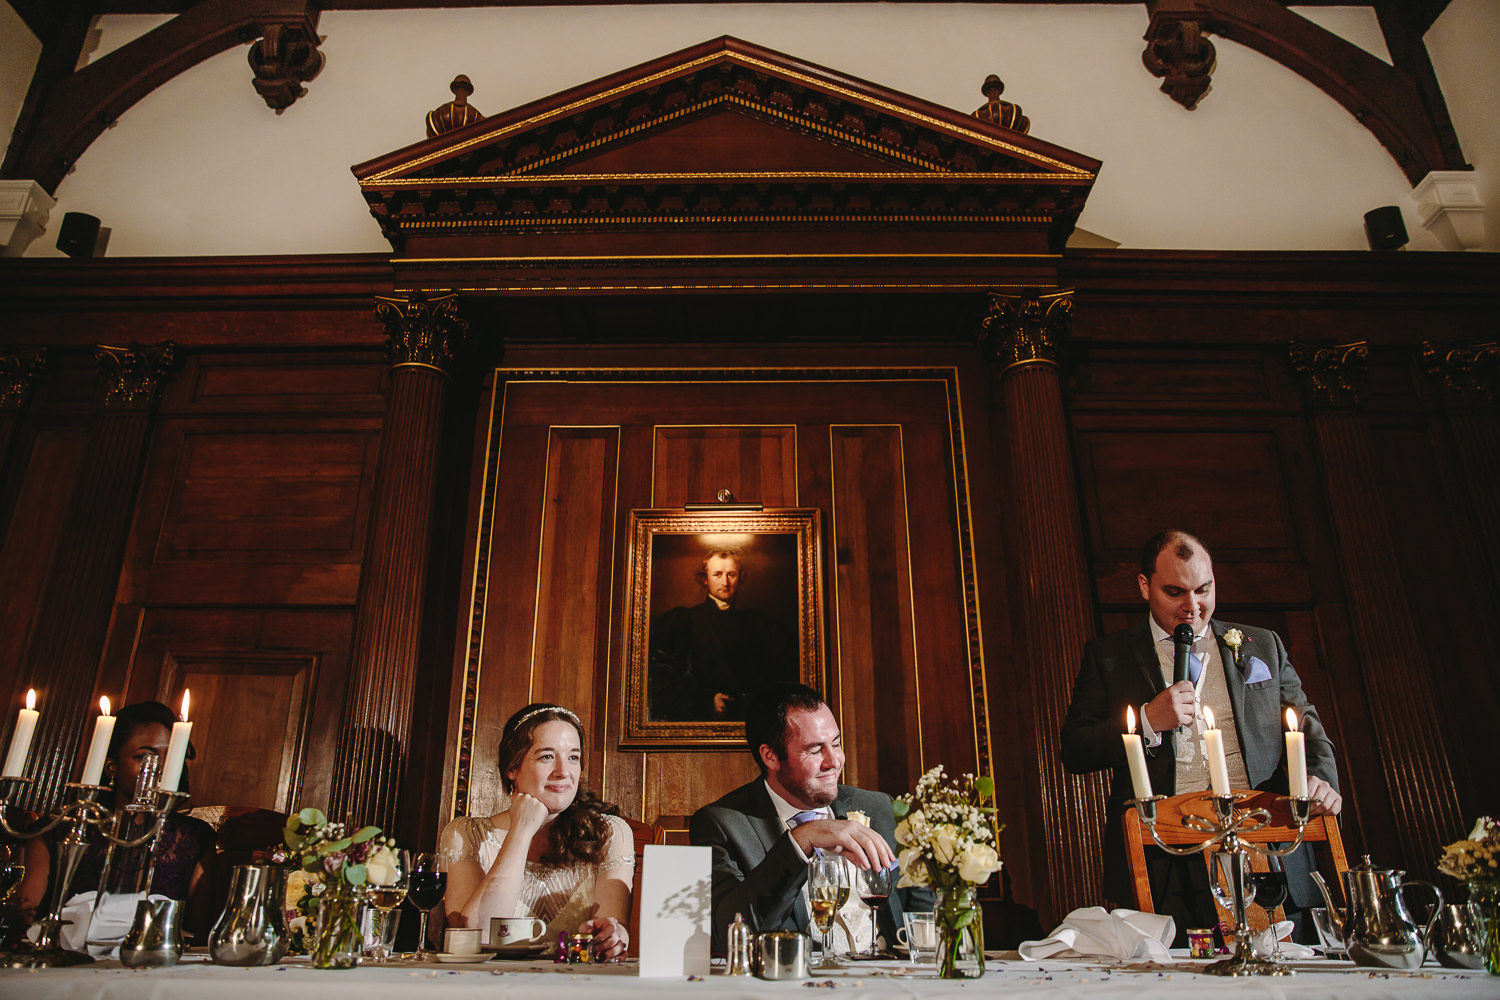 Wedding speeches inside the main hall at Selwyn college Cambridge university. Bride, groom and bridesmaid listen to the best man speech with animated expressions.